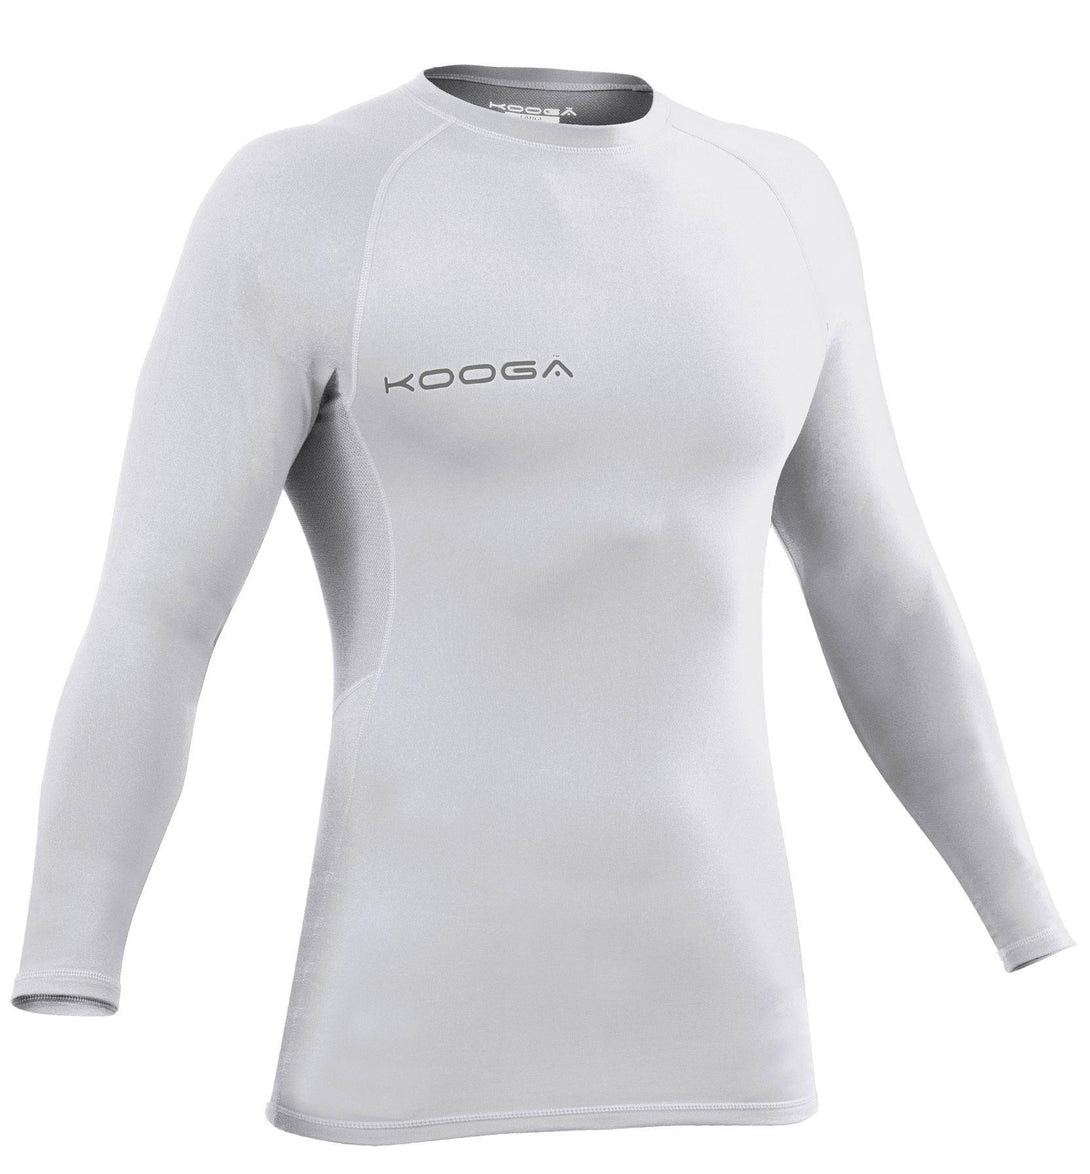 Rugby Heaven Kooga Power Rugby Shirt Pro Jnr - White - www.rugby-heaven.co.uk